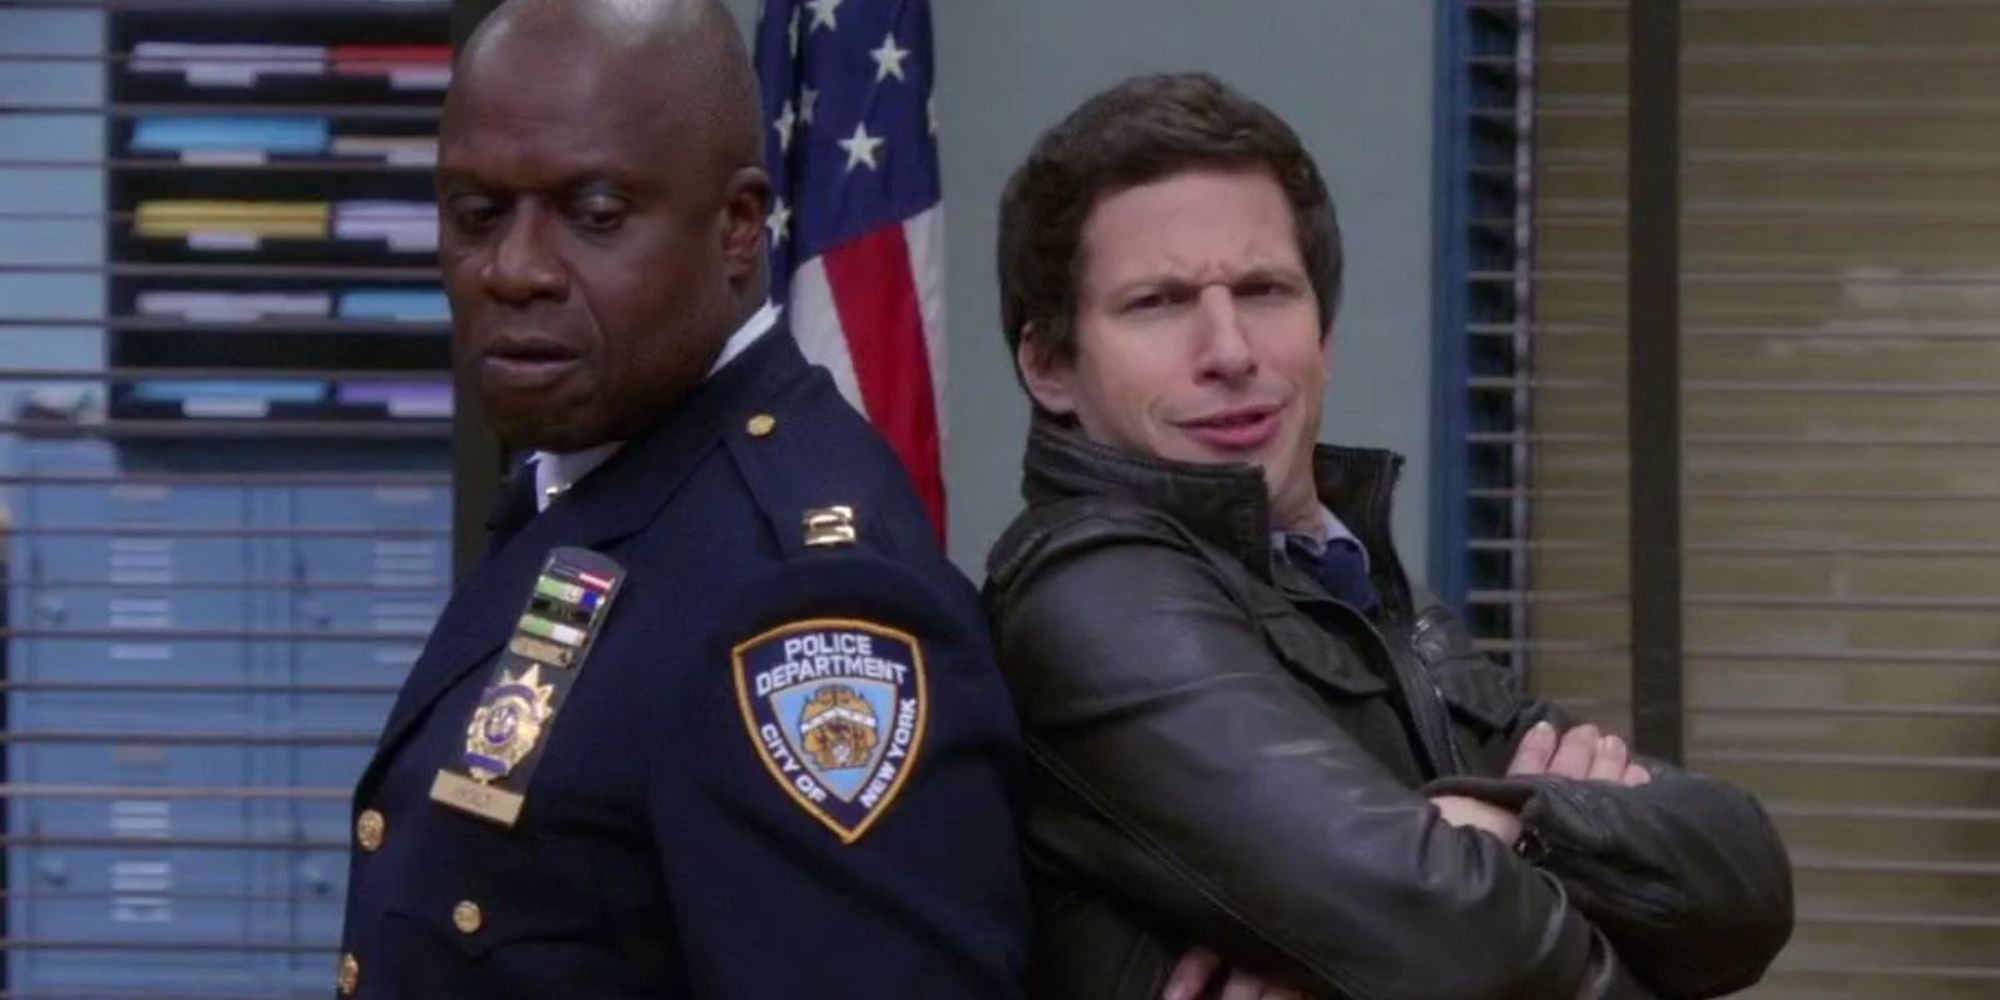 Holt and Jake